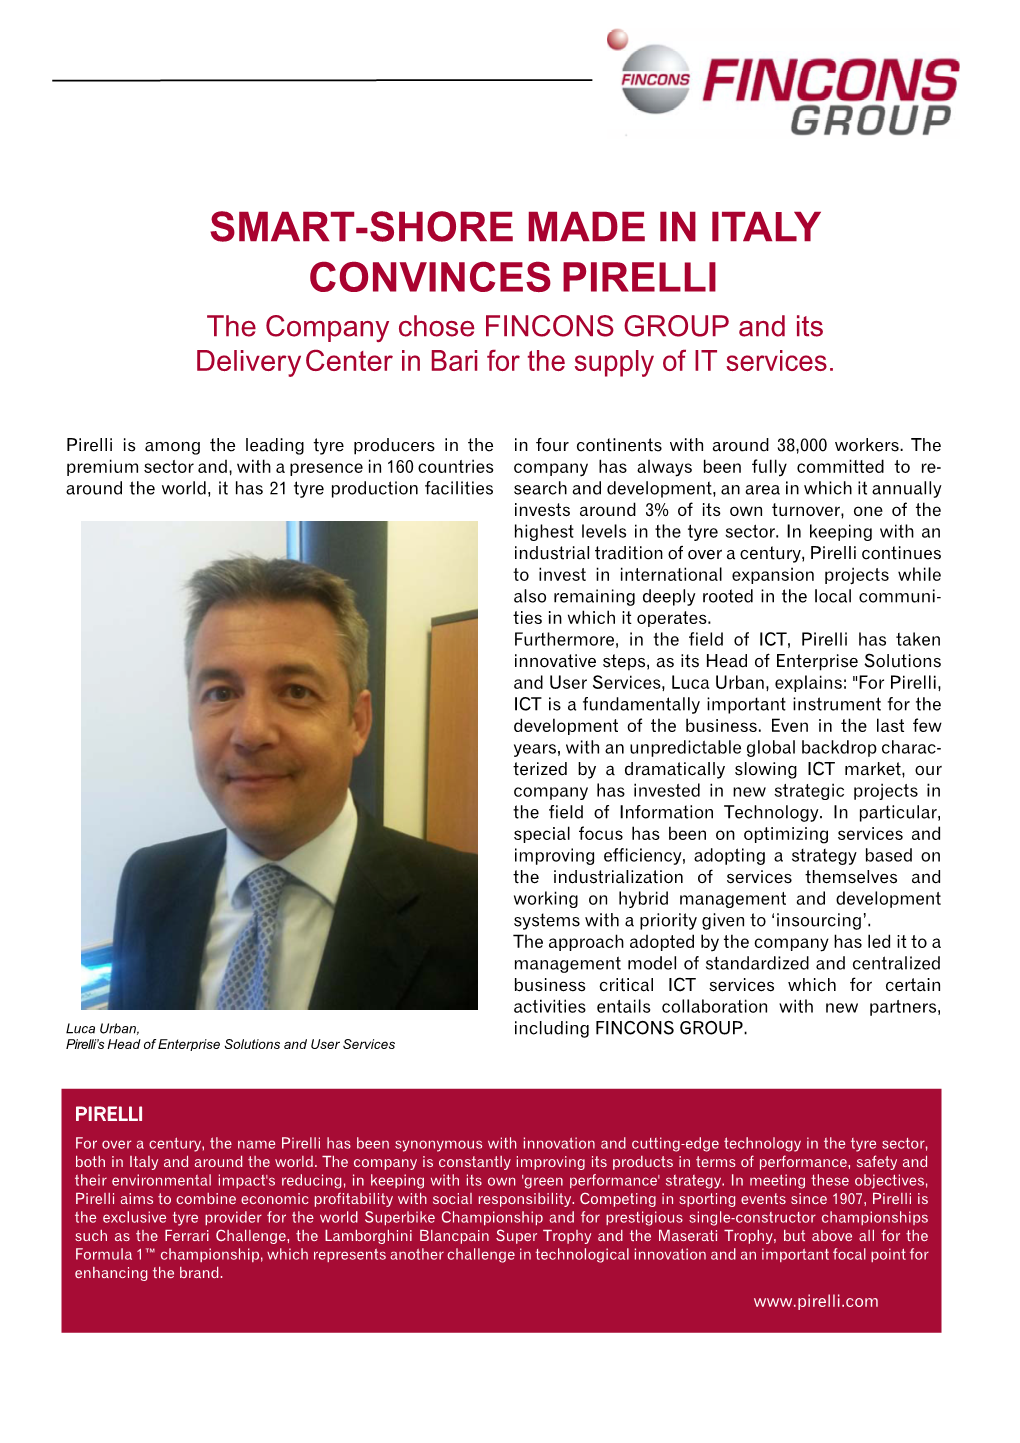 SMART-SHORE MADE in ITALY CONVINCES PIRELLI the Company Chose FINCONS GROUP and Its Delivery Center in Bari for the Supply of IT Services